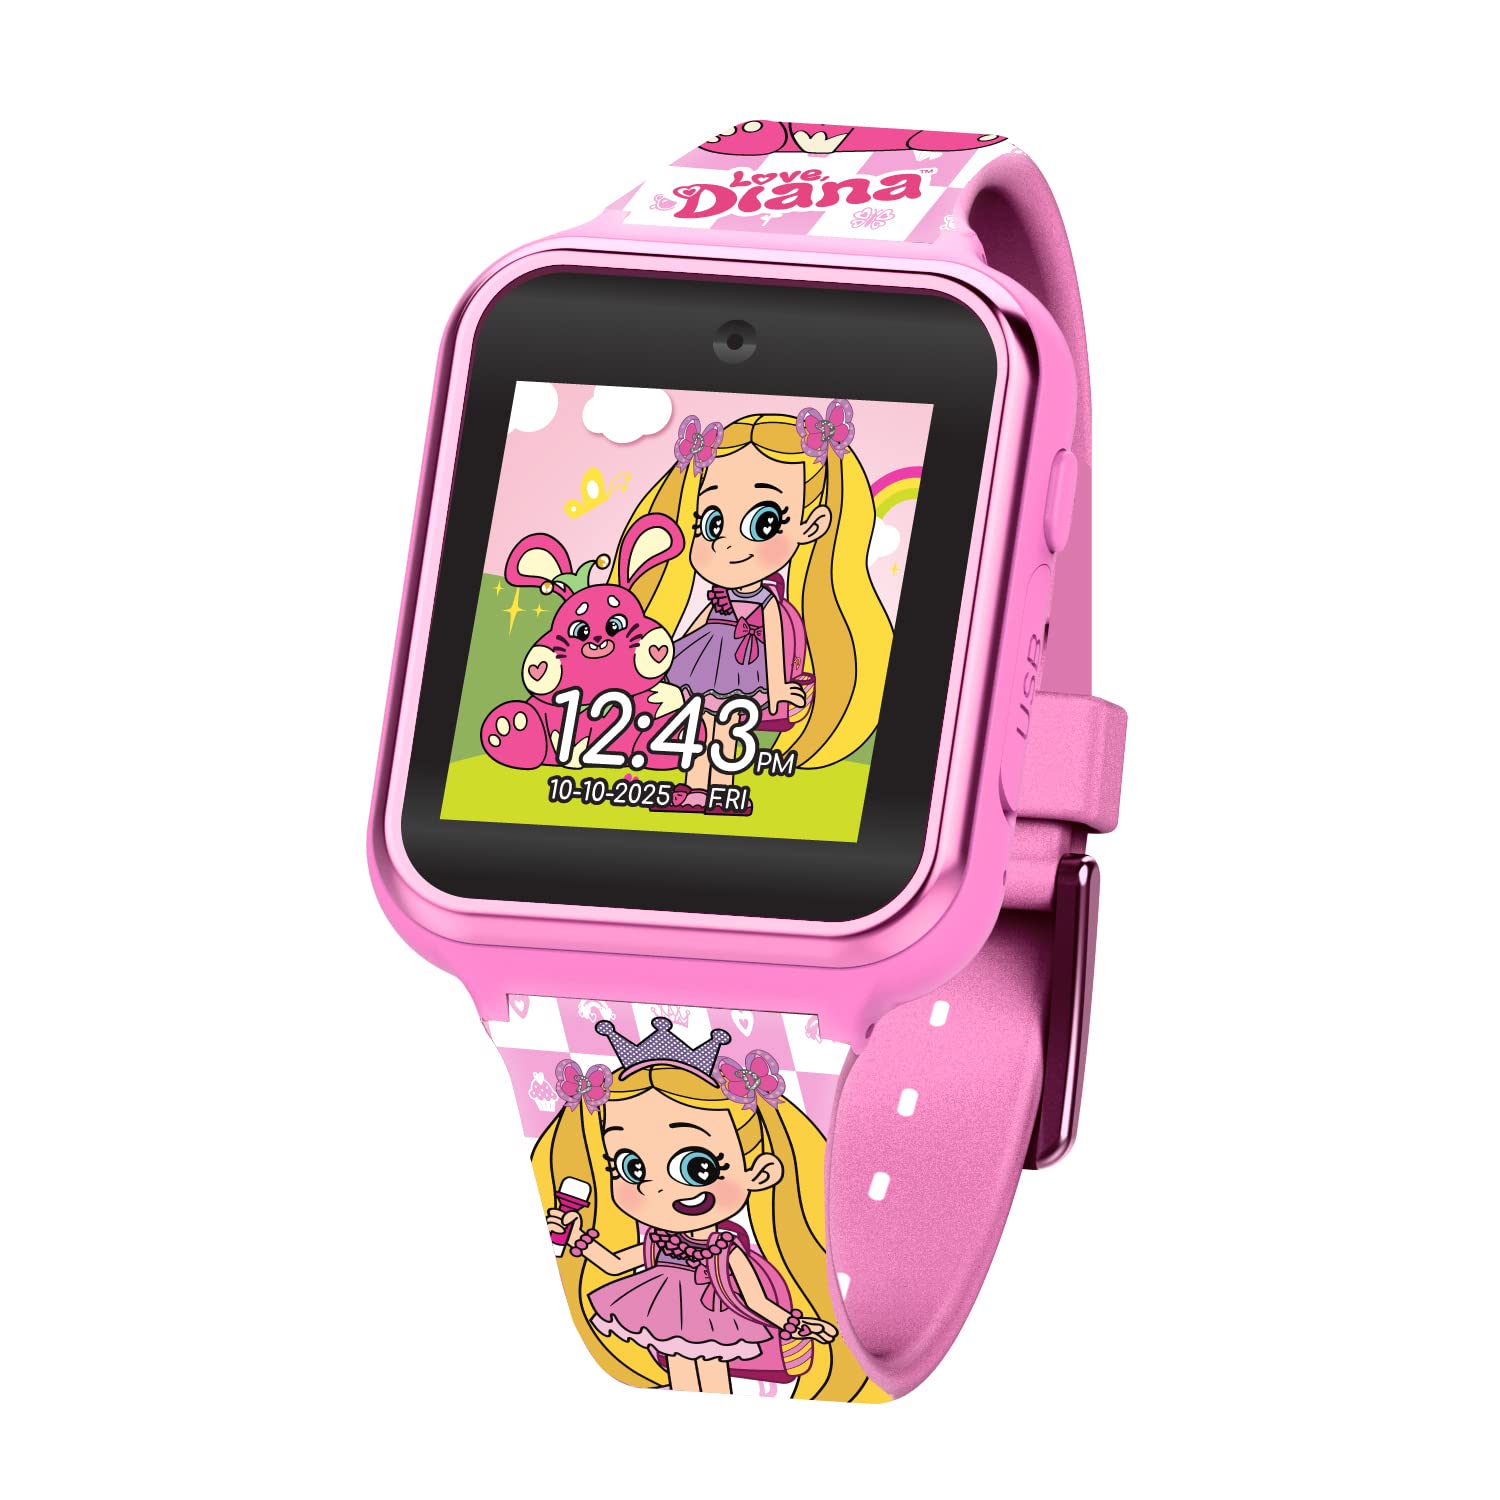 Accutime Kids Love, Diana Show Educational Learning Touchscreen Pink Smart Watch Toy with Graphic Strap for Girls, Boys, Toddlers - Selfie Cam, Games, Alarm, Calculator, Pedometer (Model: LDA4037AZ)